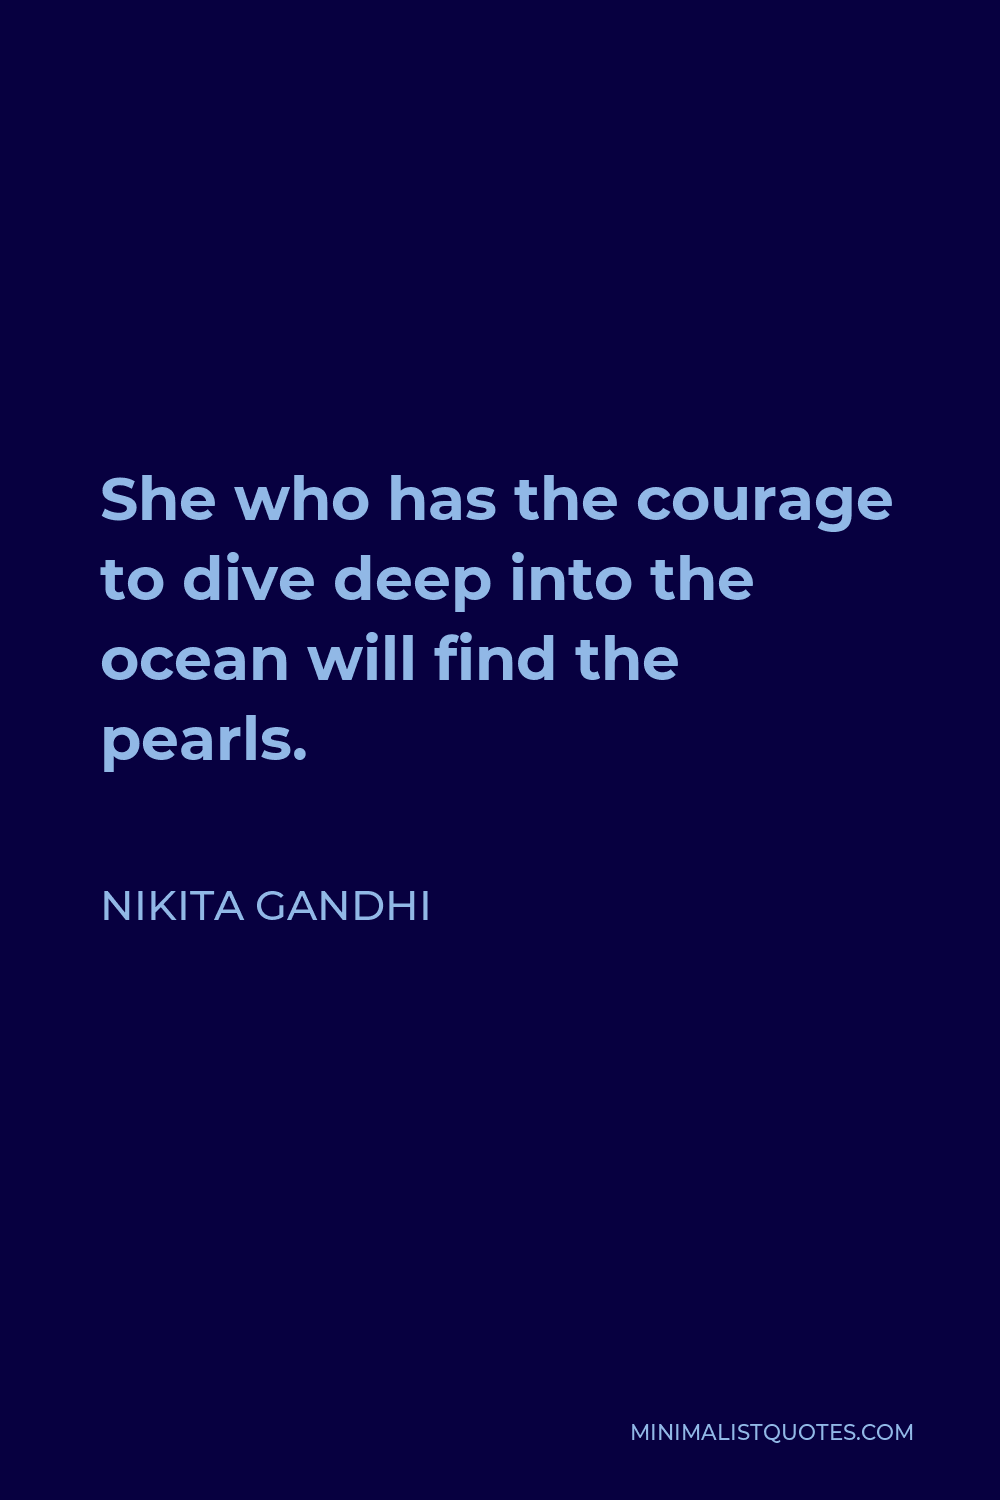 Nikita Gandhi Quote - She who has the courage to dive deep into the ocean will find the pearls.